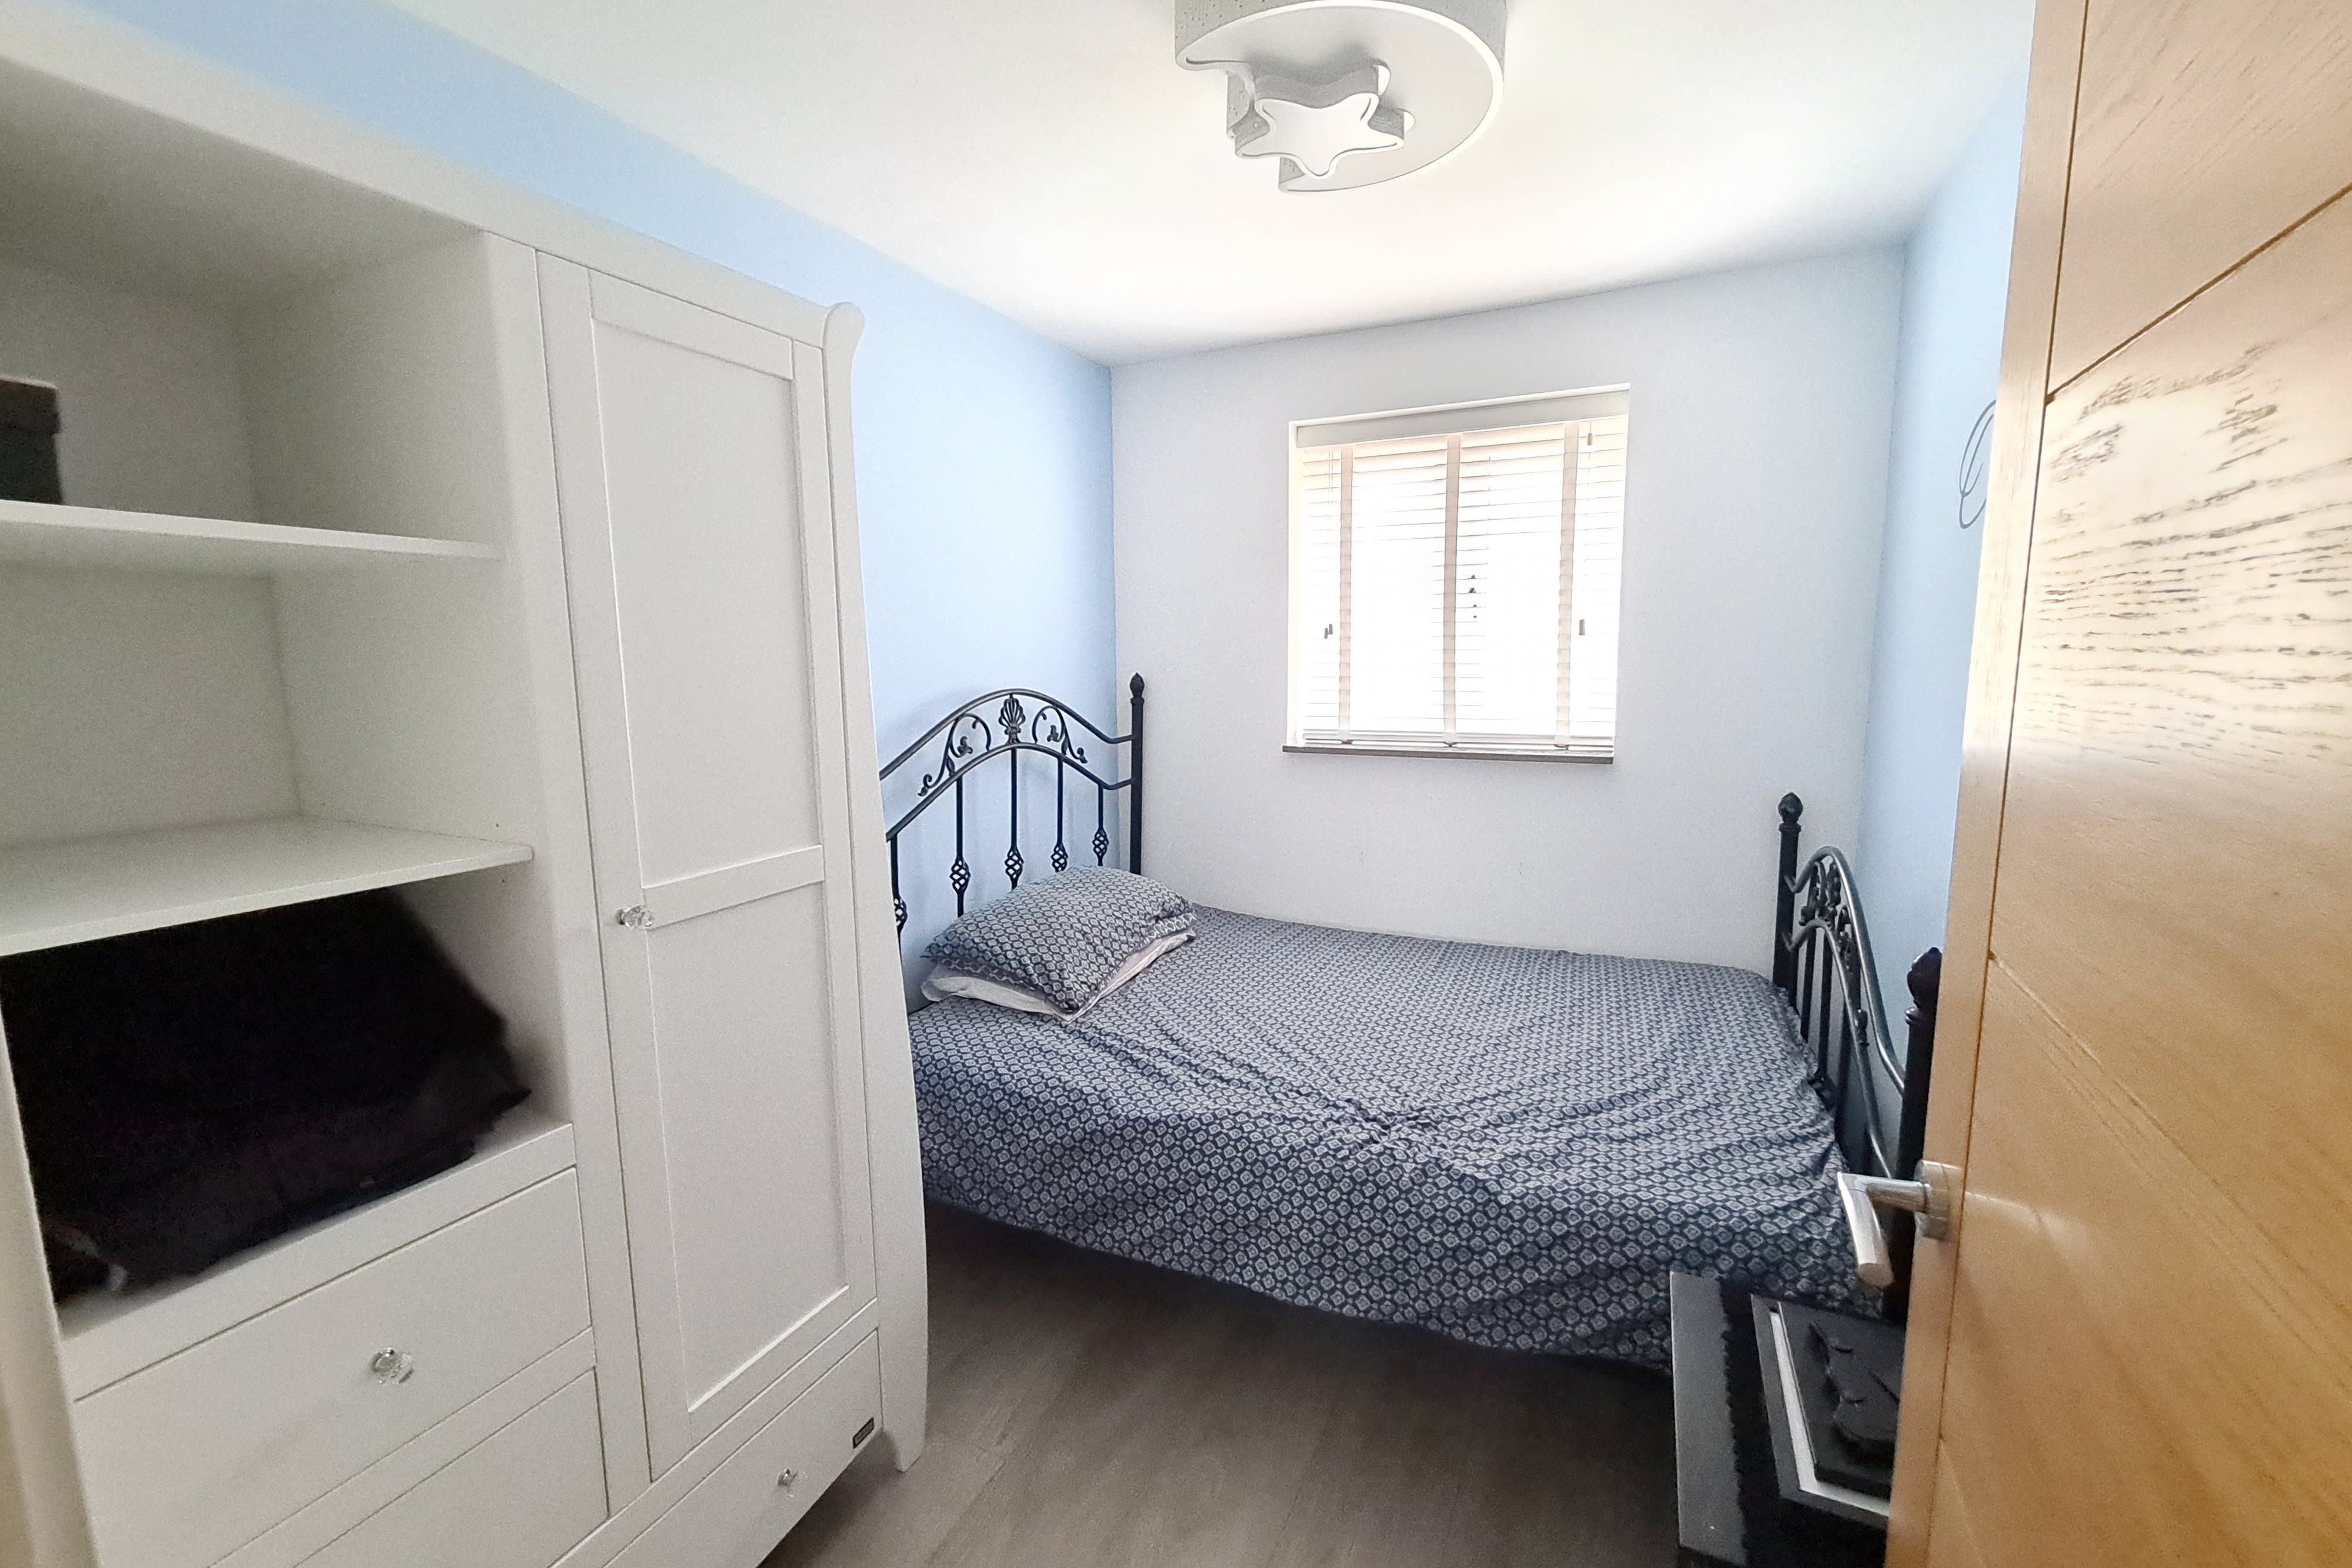 1 bed house / flat share to rent in The Chase (Bedroom 3), Rayleigh 0